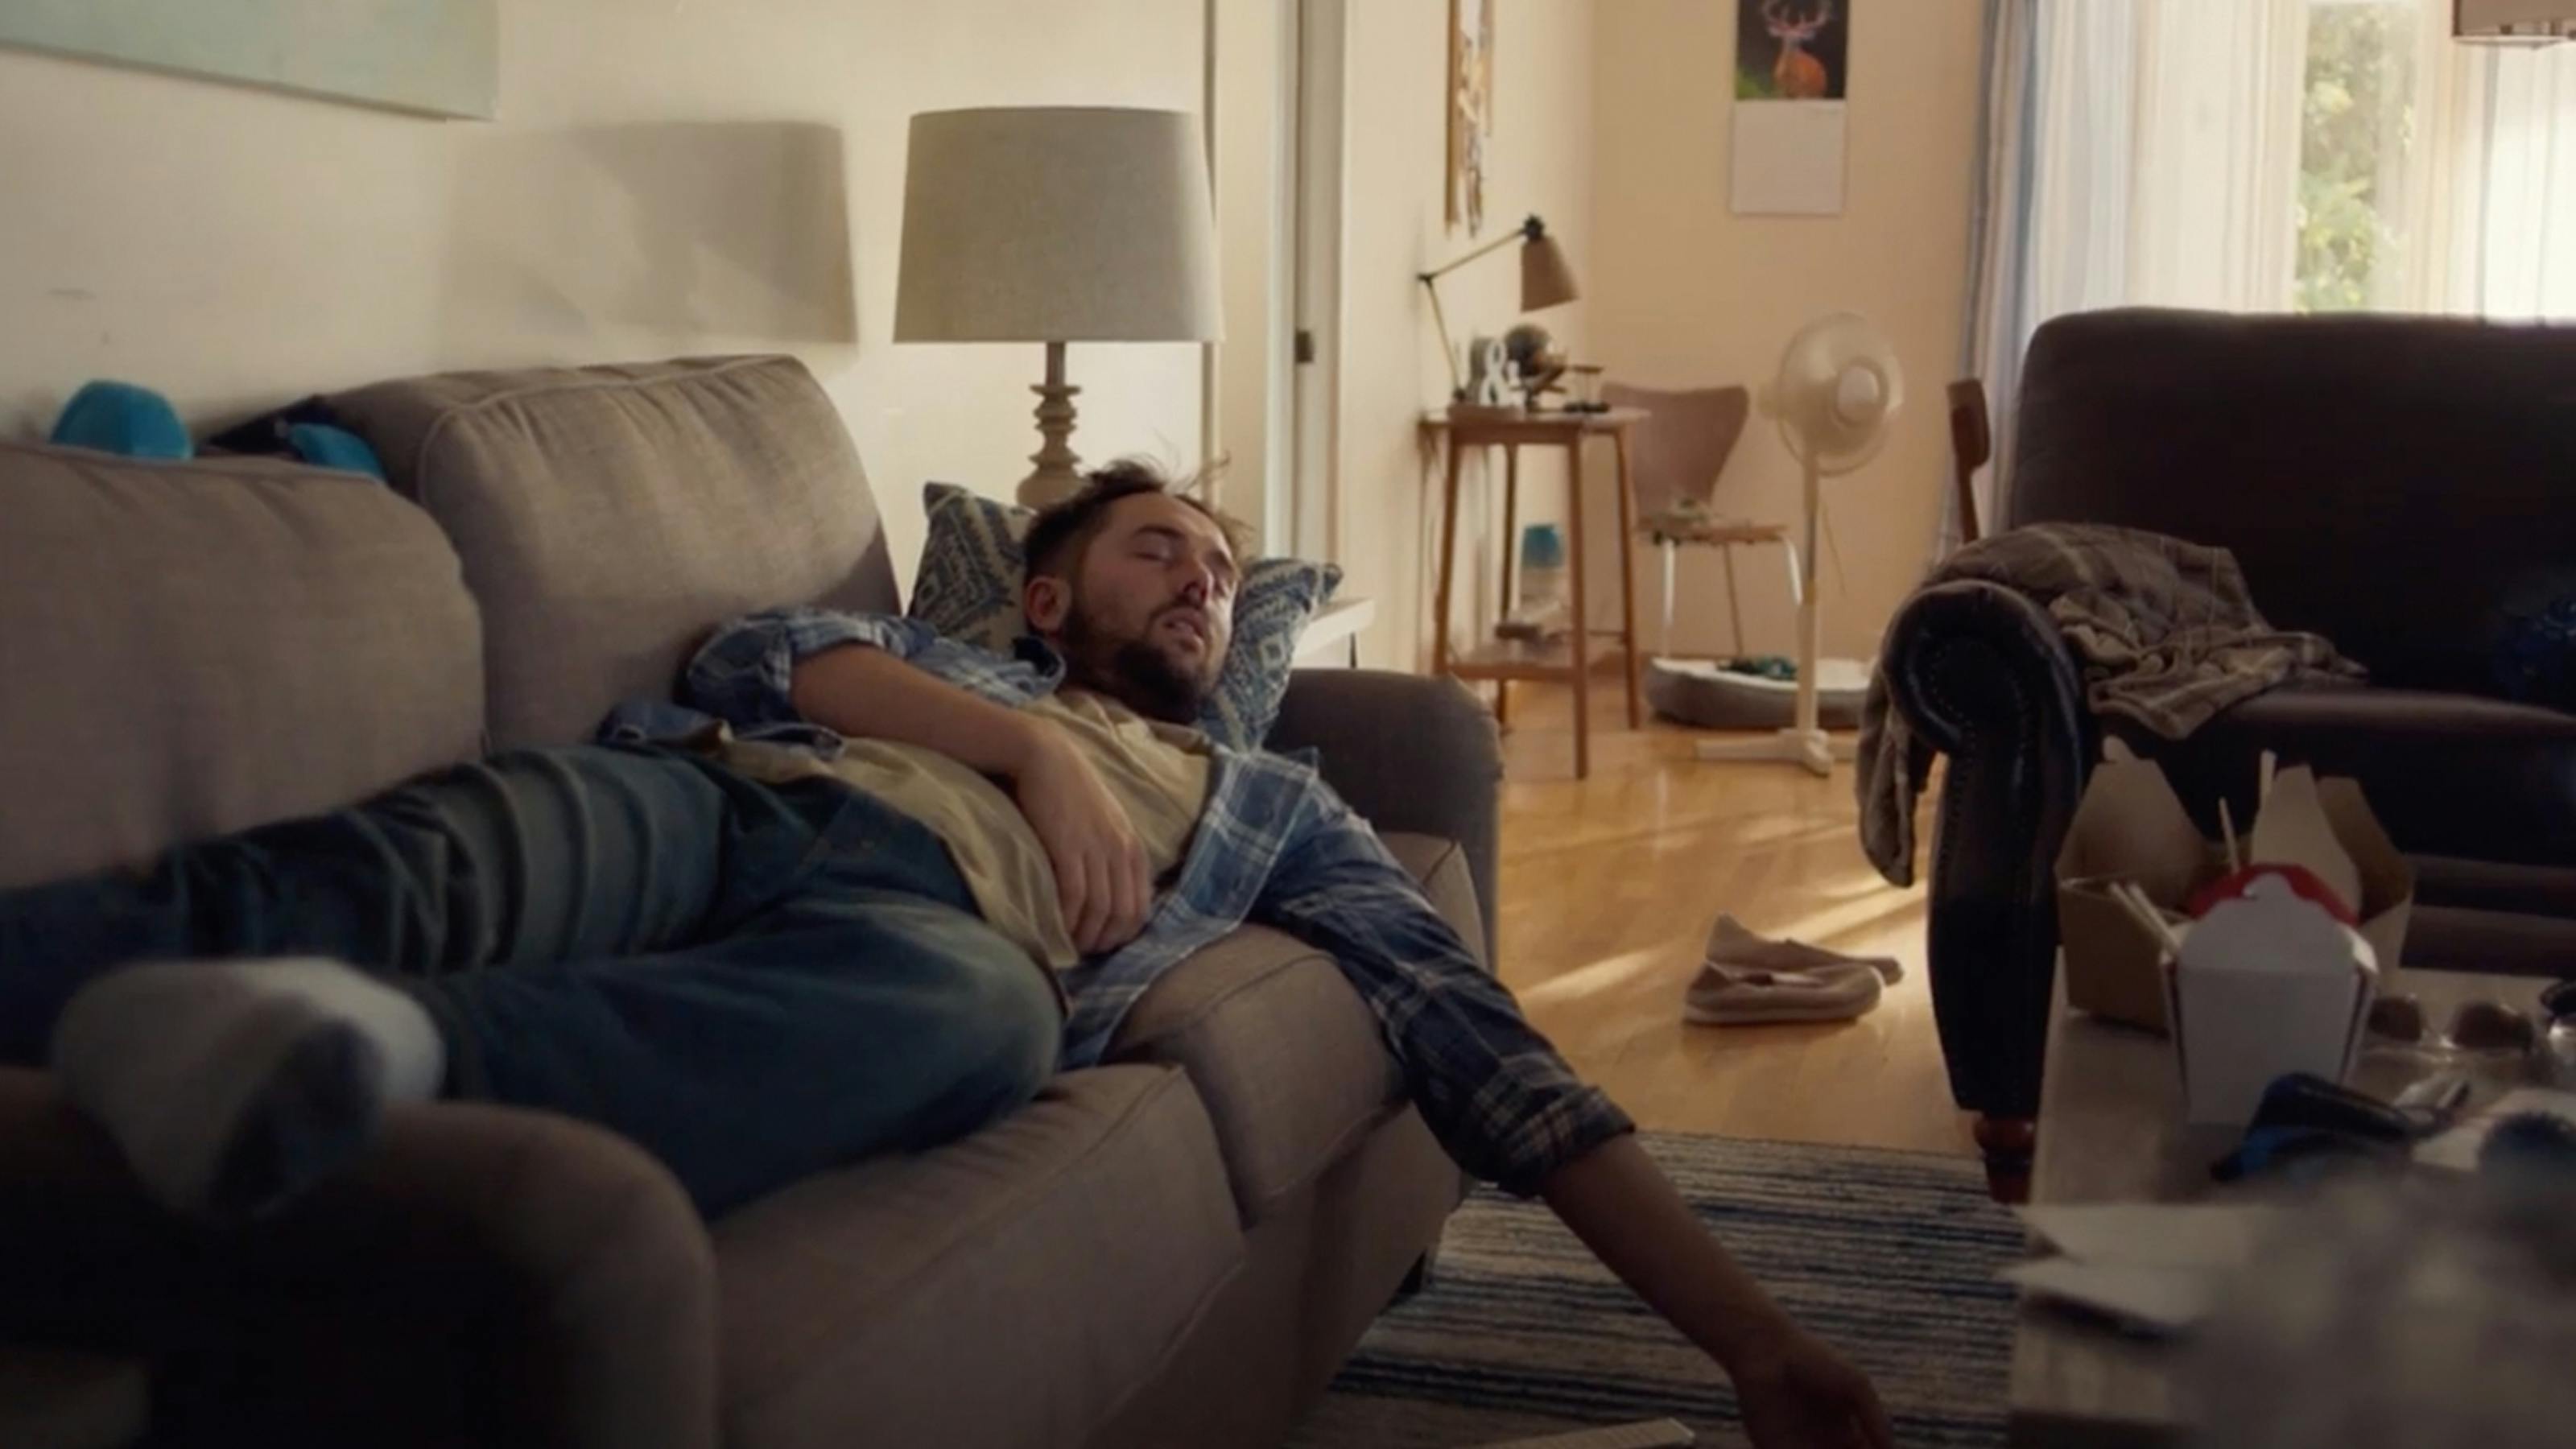 Screen grab of man napping on the couch in an untidy apartment for “Snore” Walmart campaign.